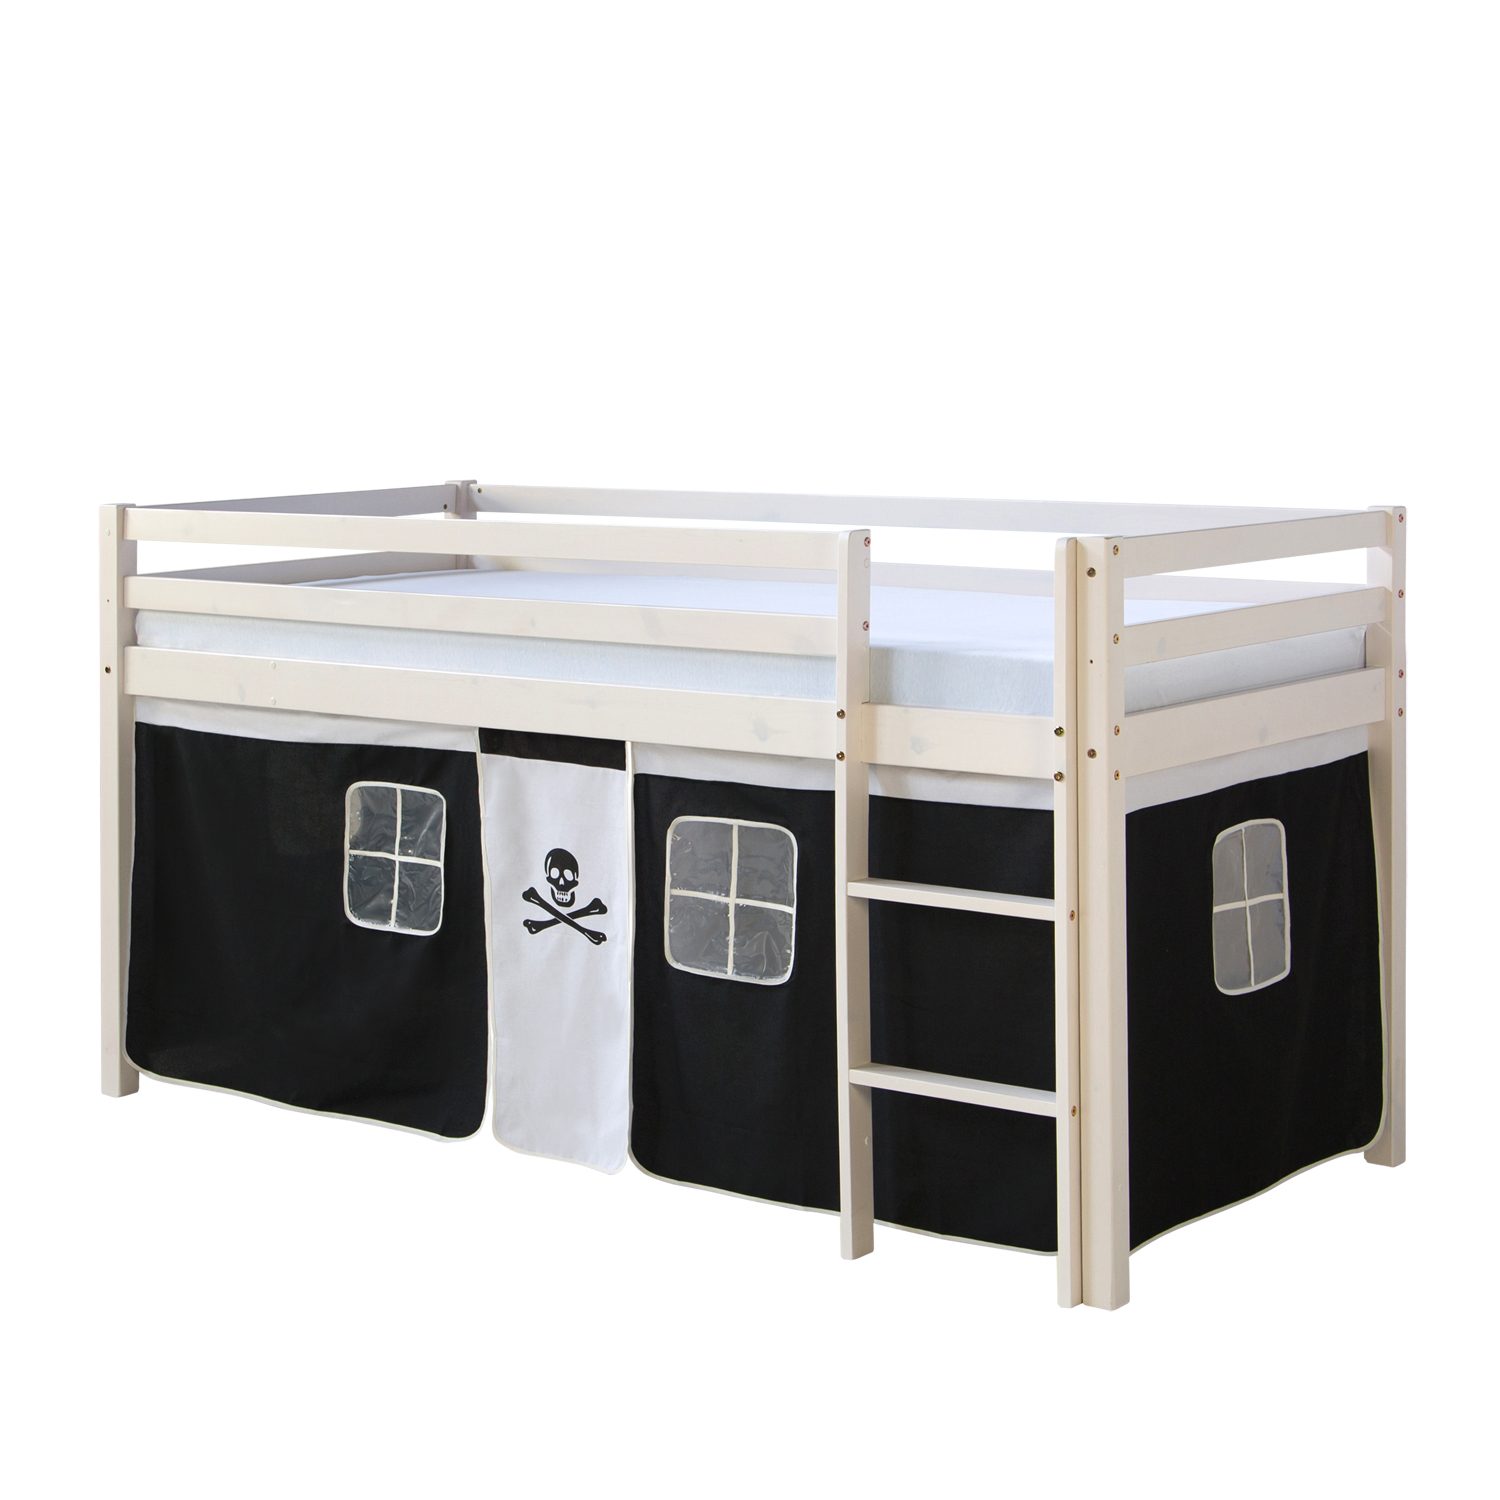 Loftbed 90x200 cm with Slats Bunk bed Childrens bed Solid Pine Wood Curtain Black Pirate